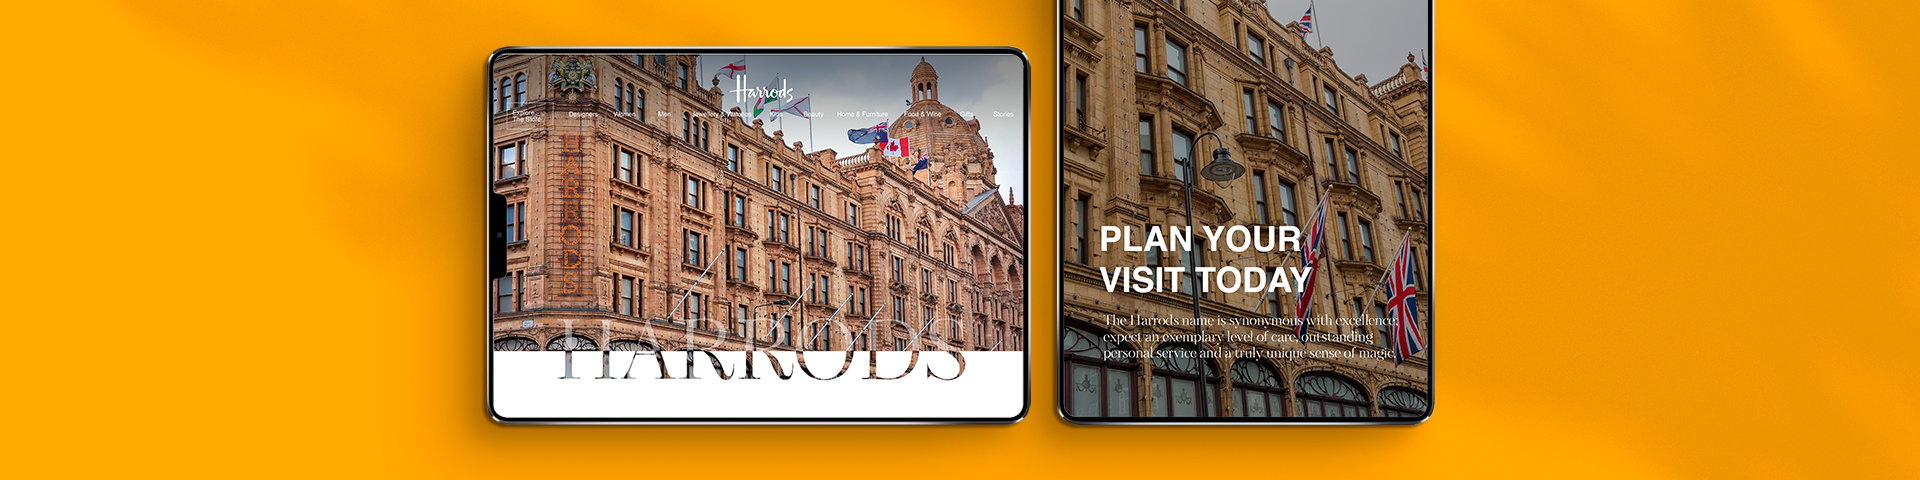 Case Study Harrods - a 360 holistic view of their customer data